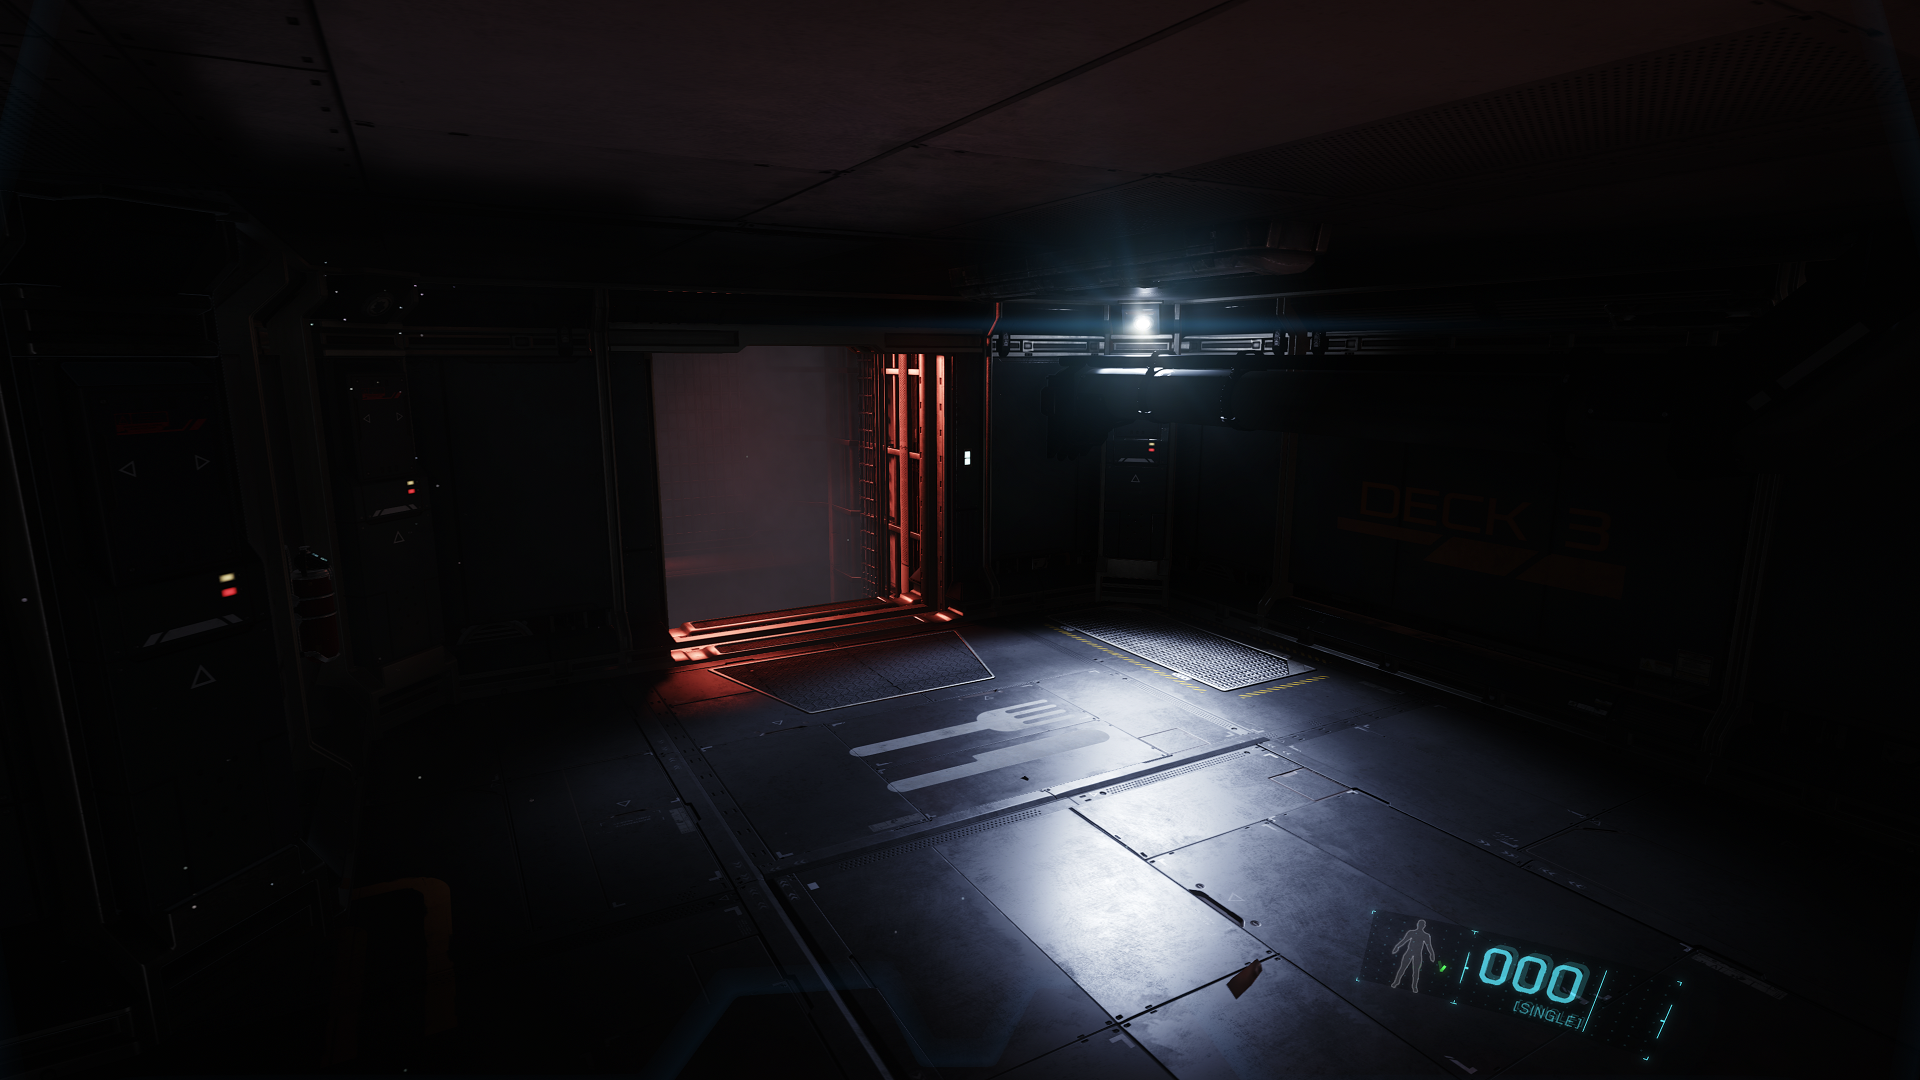 starcitizen2015-11-26ptp4x.png